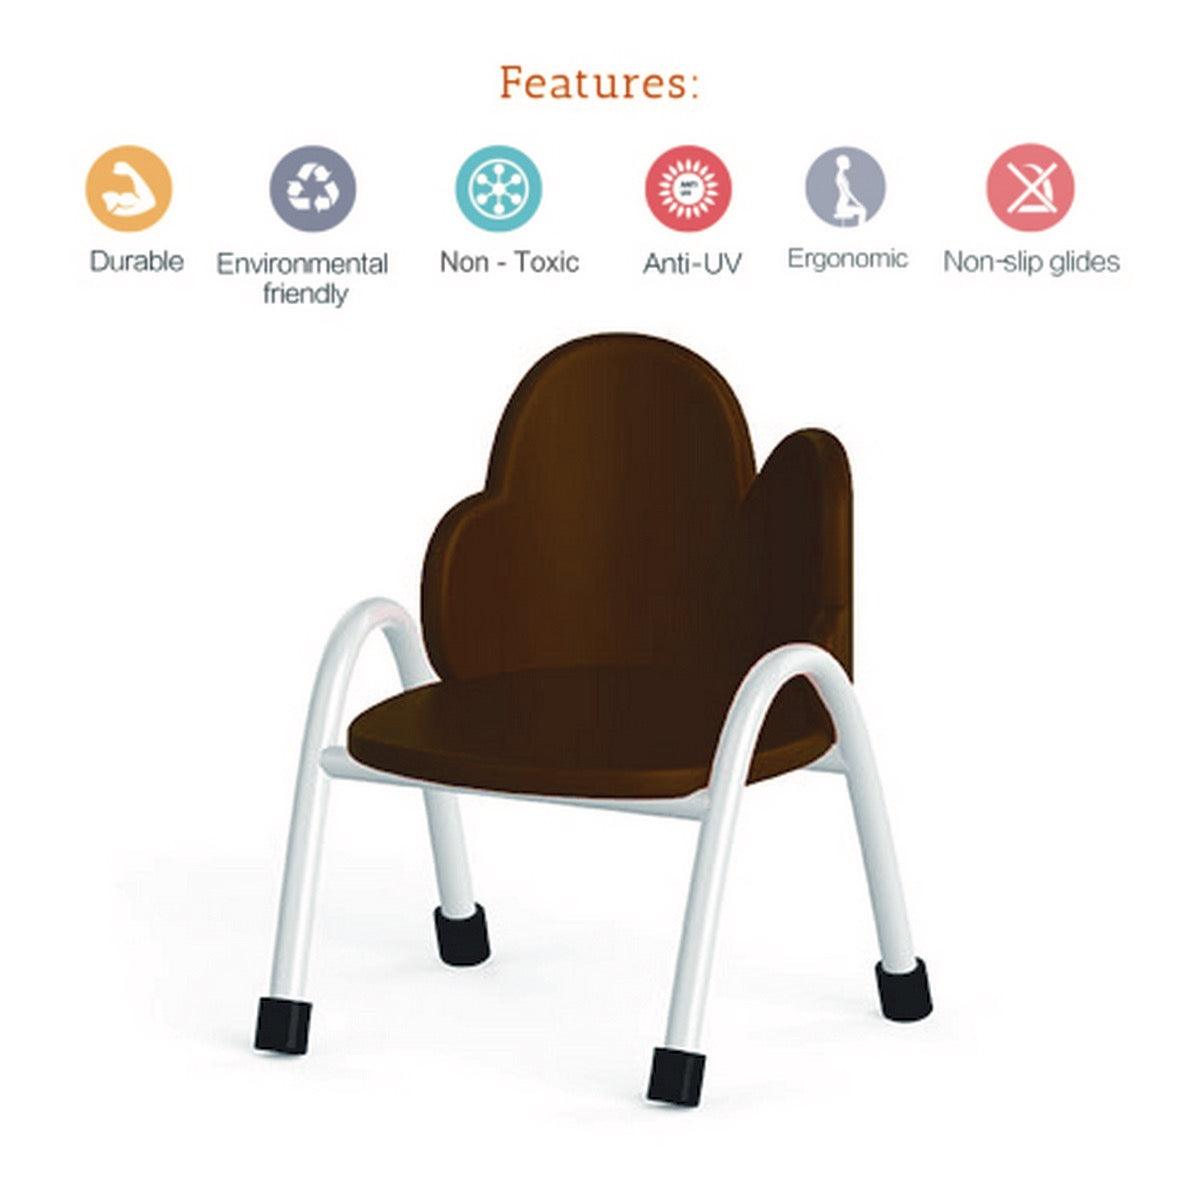 Ok Play Cloud Chair, Study Chair, Sturdy And Durable Chair, Plastic Chair, Perfect For Home, Creches And School, Brown, 5 to 10 Years, Height 12 Inches